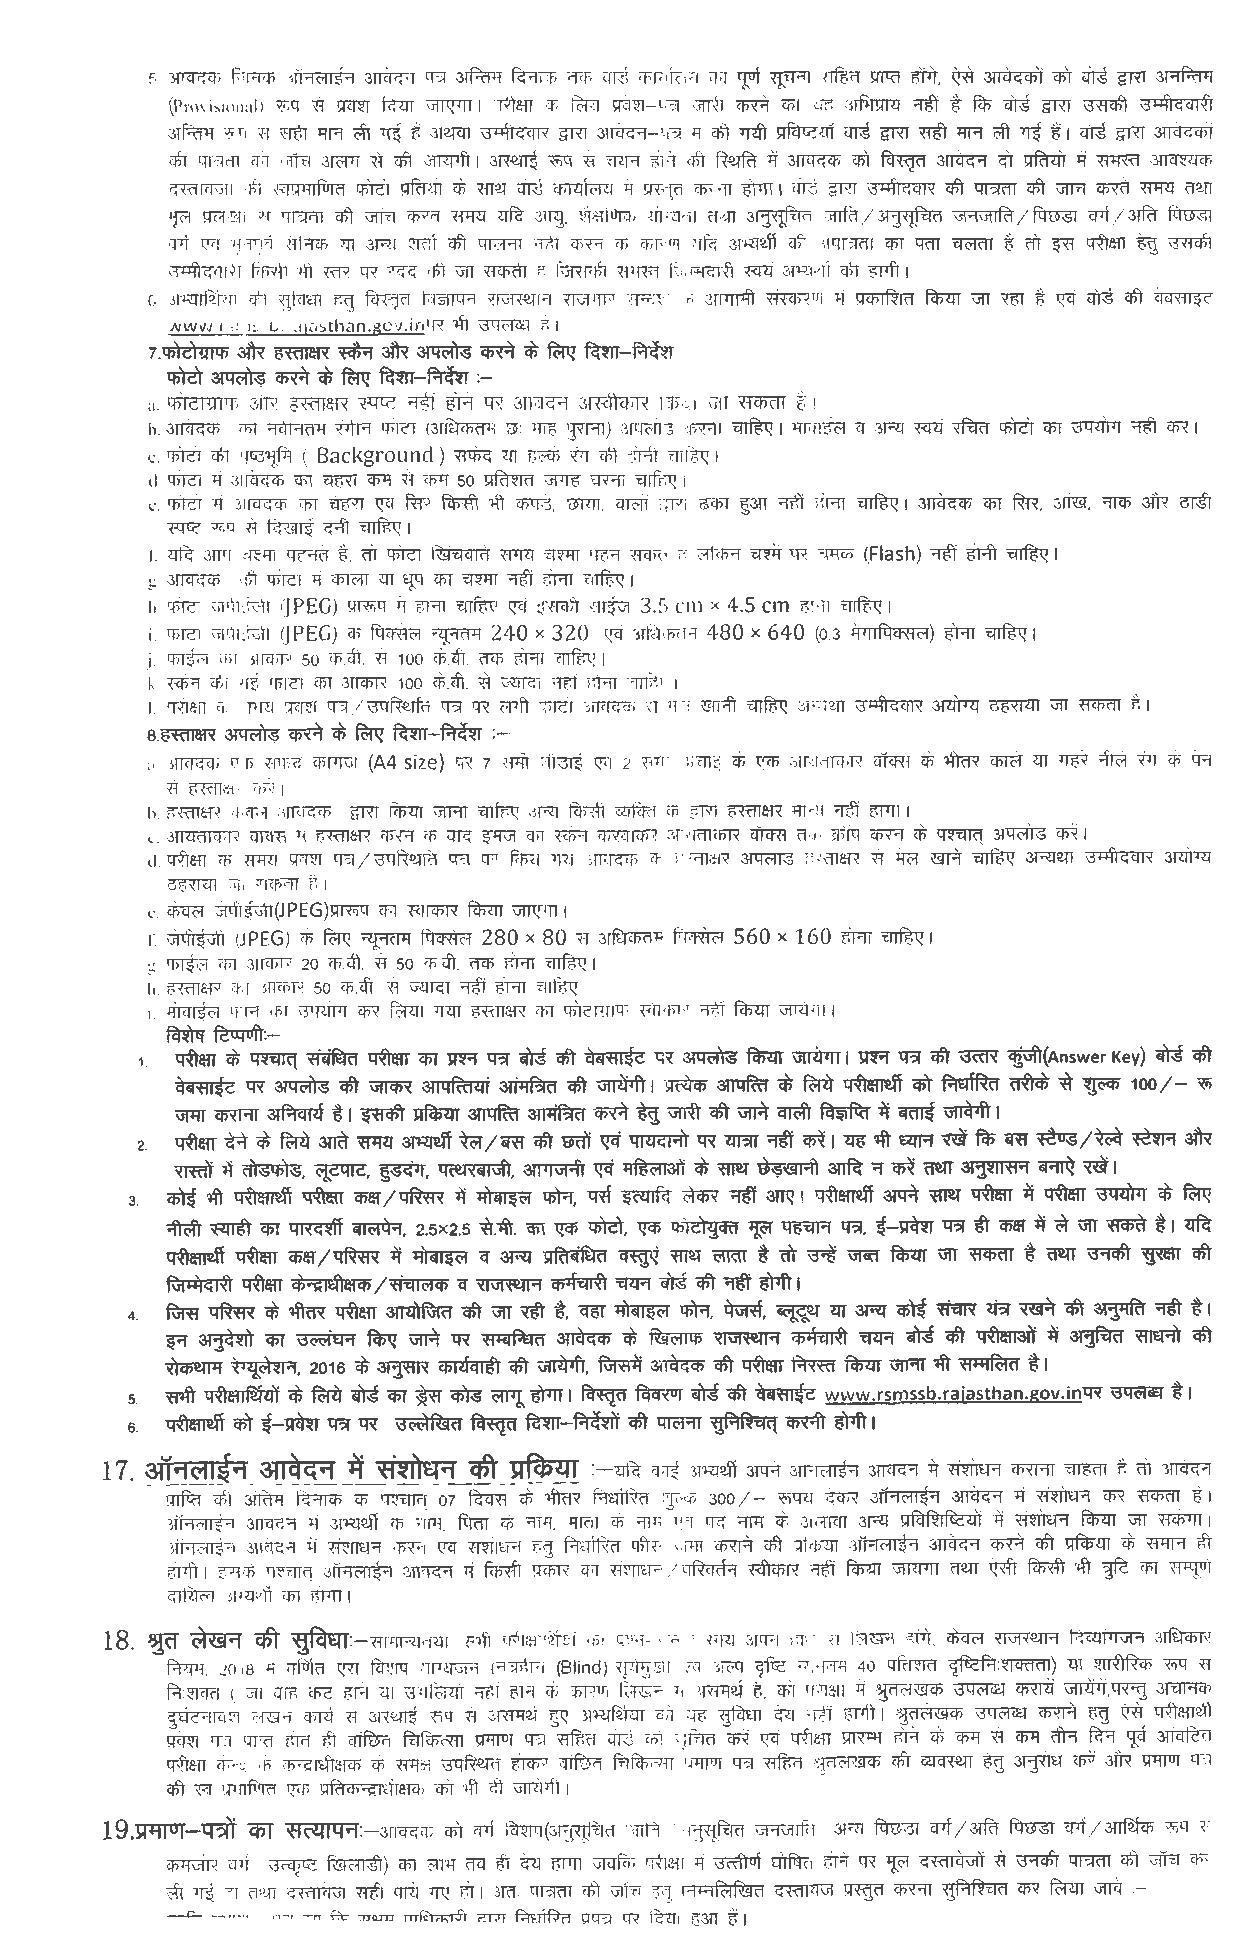 Download Notification – Advt. No. 04/2020 - Page 1